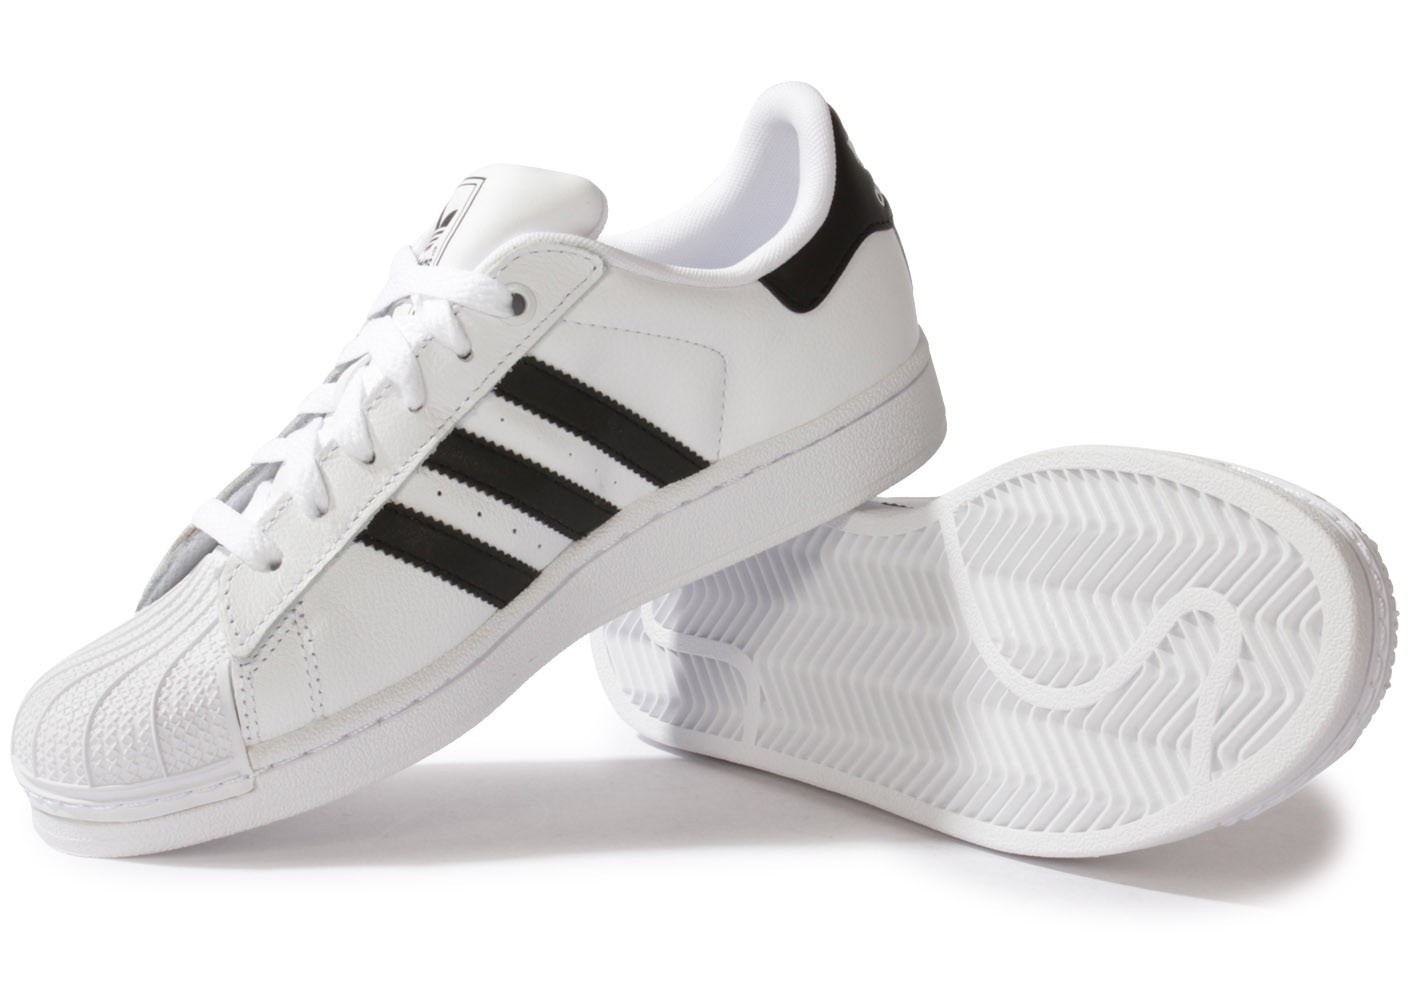 adidas superstar pas cher taille 40